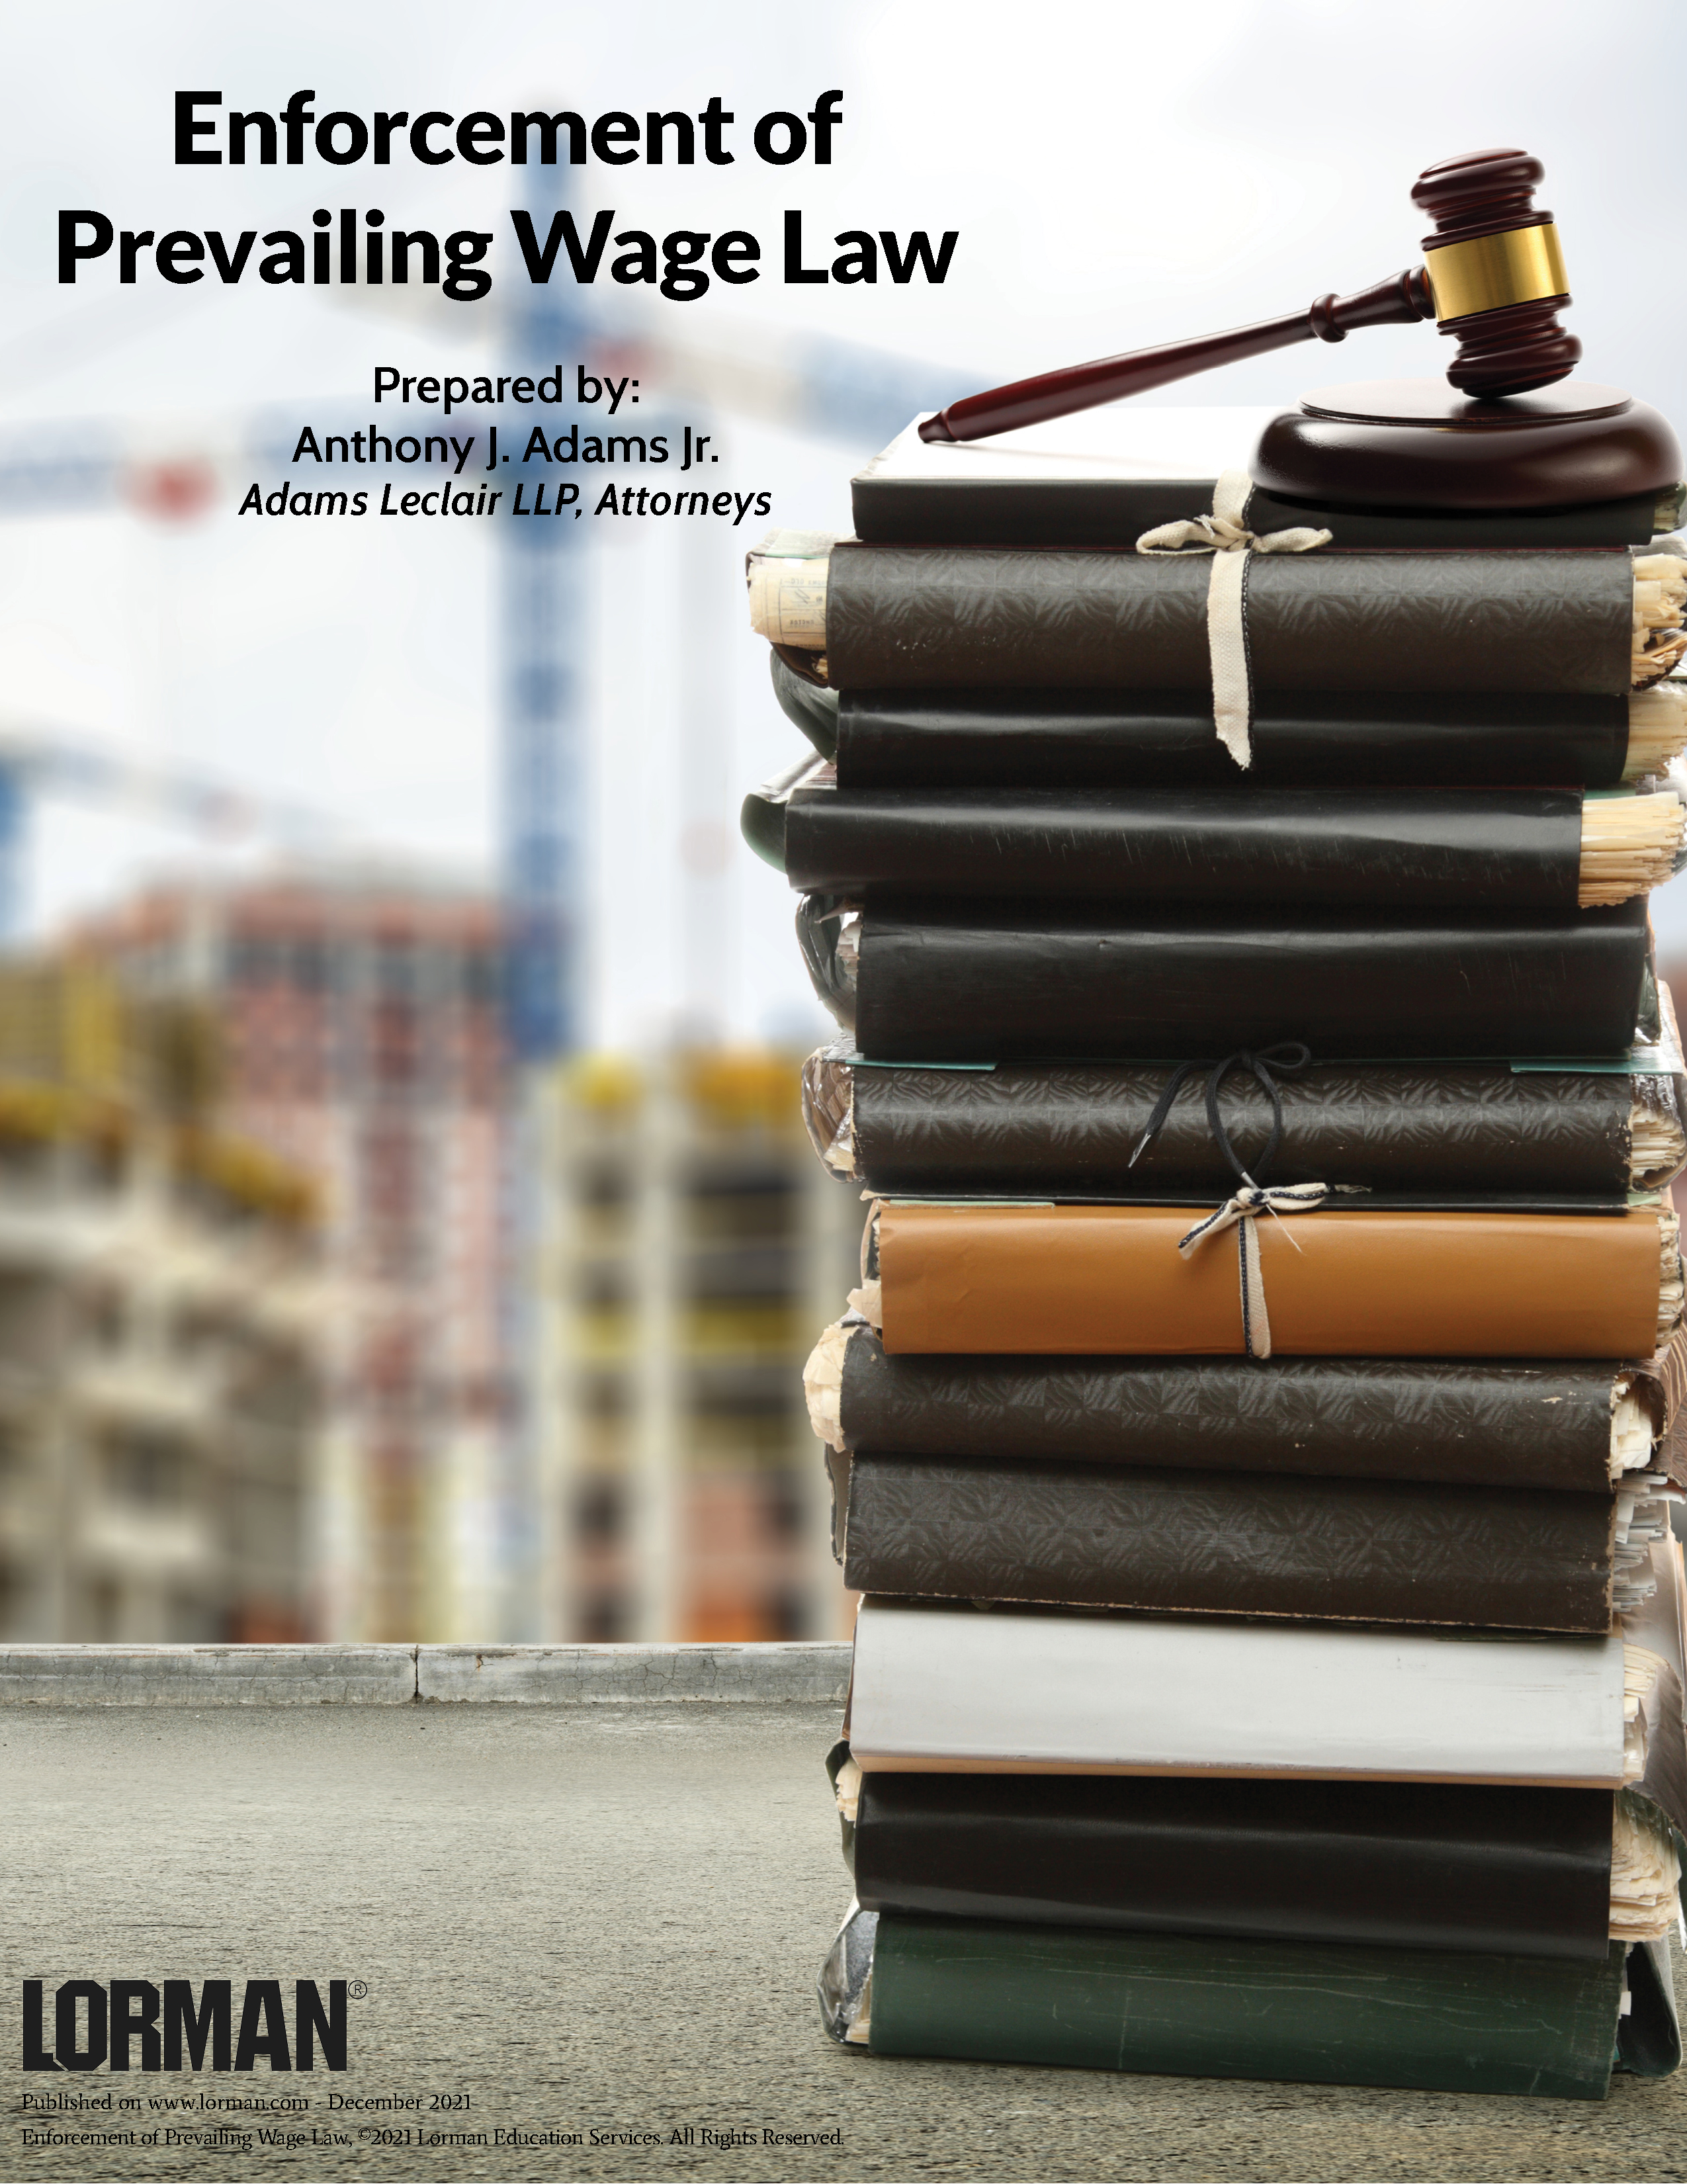 Enforcement of Prevailing Wage Law